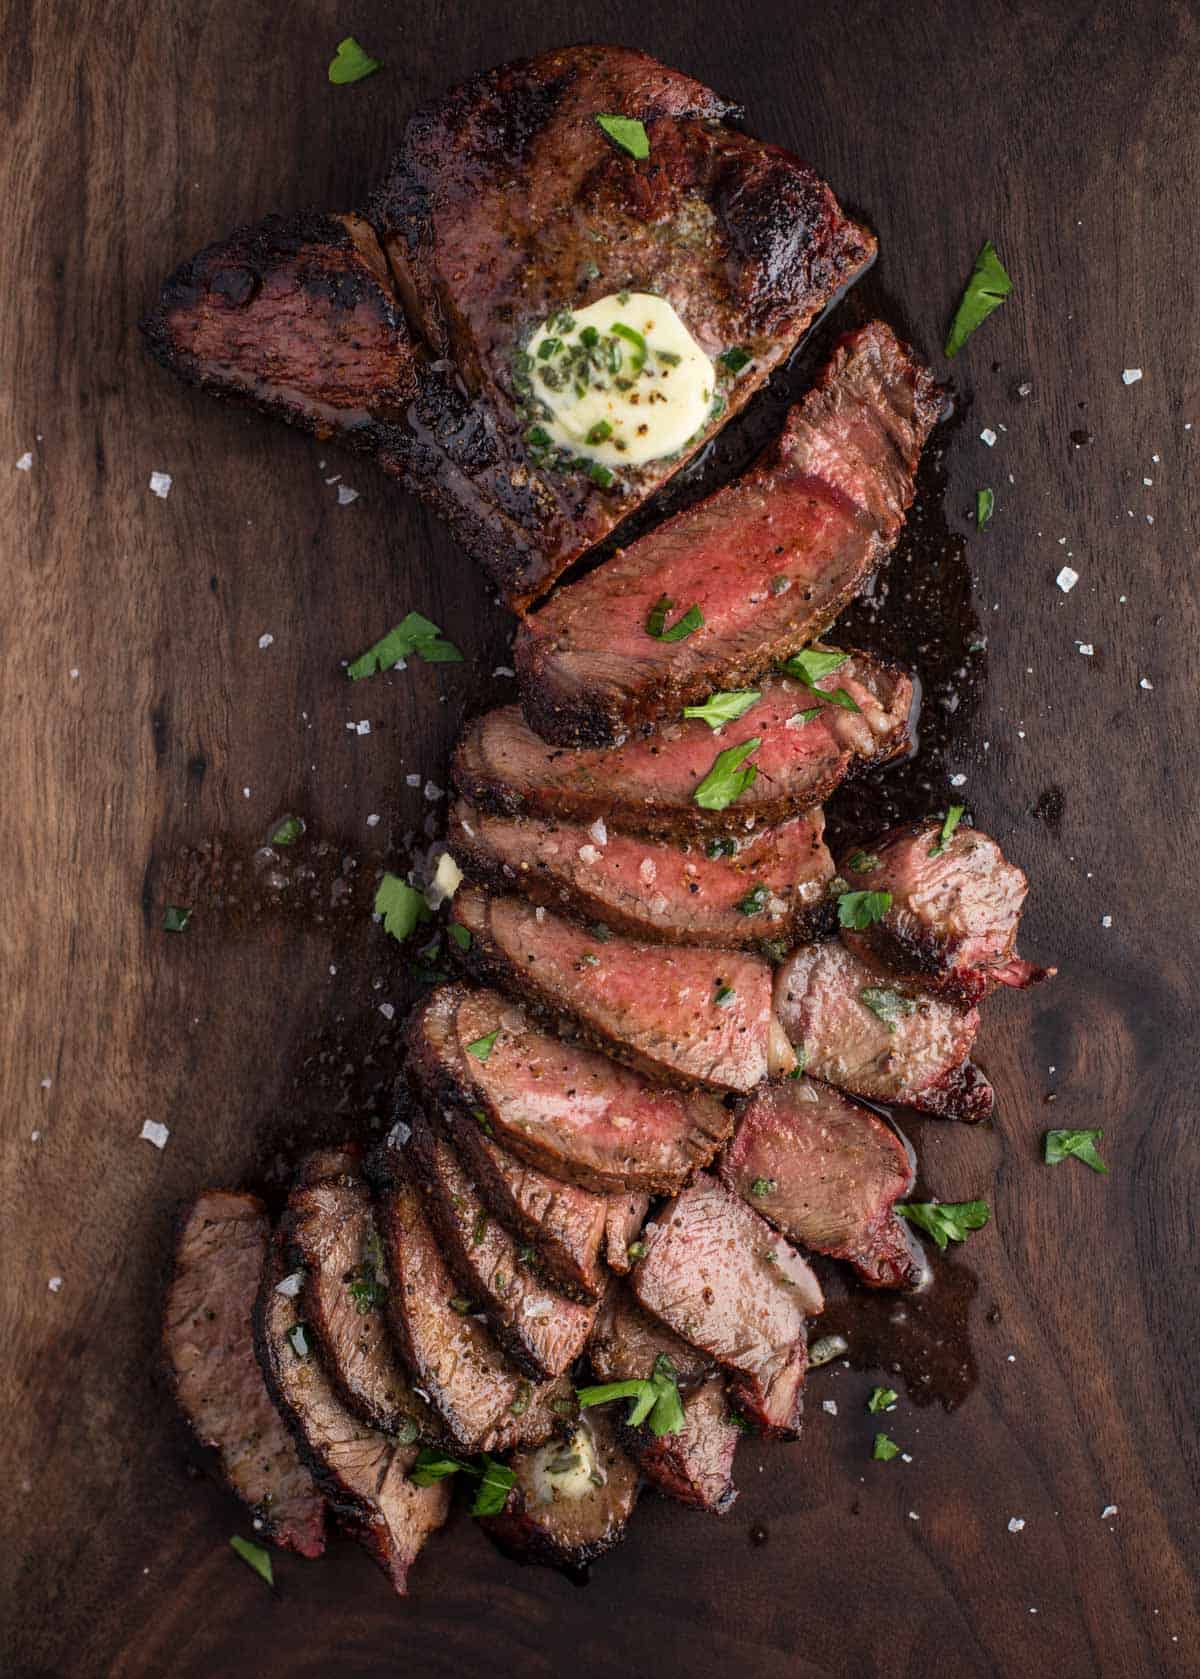 Slices of a Grilled Sirloin Steak on a cutting board and topped with an herbed compound butter